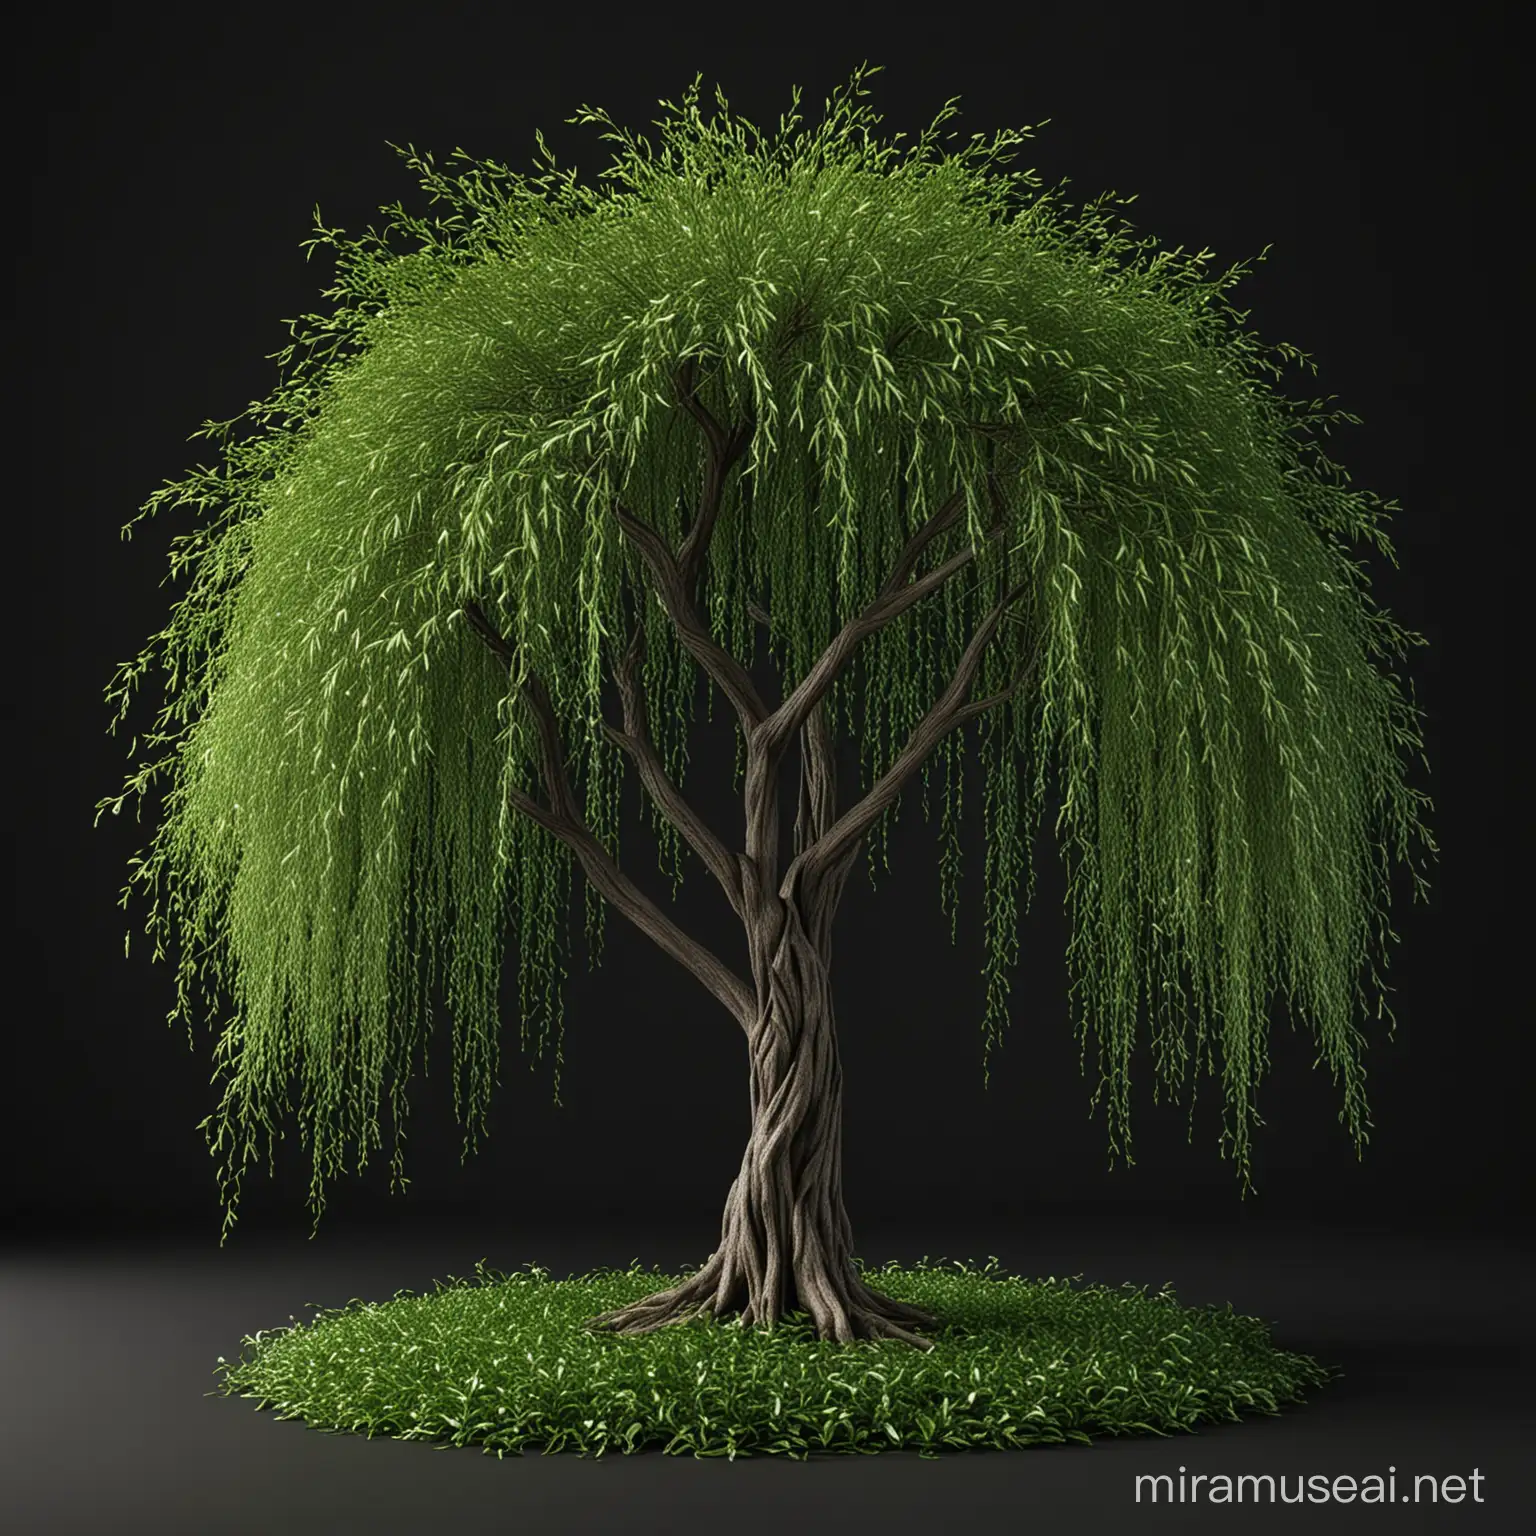 Majestic Willow Tree with Lush Green Foliage Against Black Background